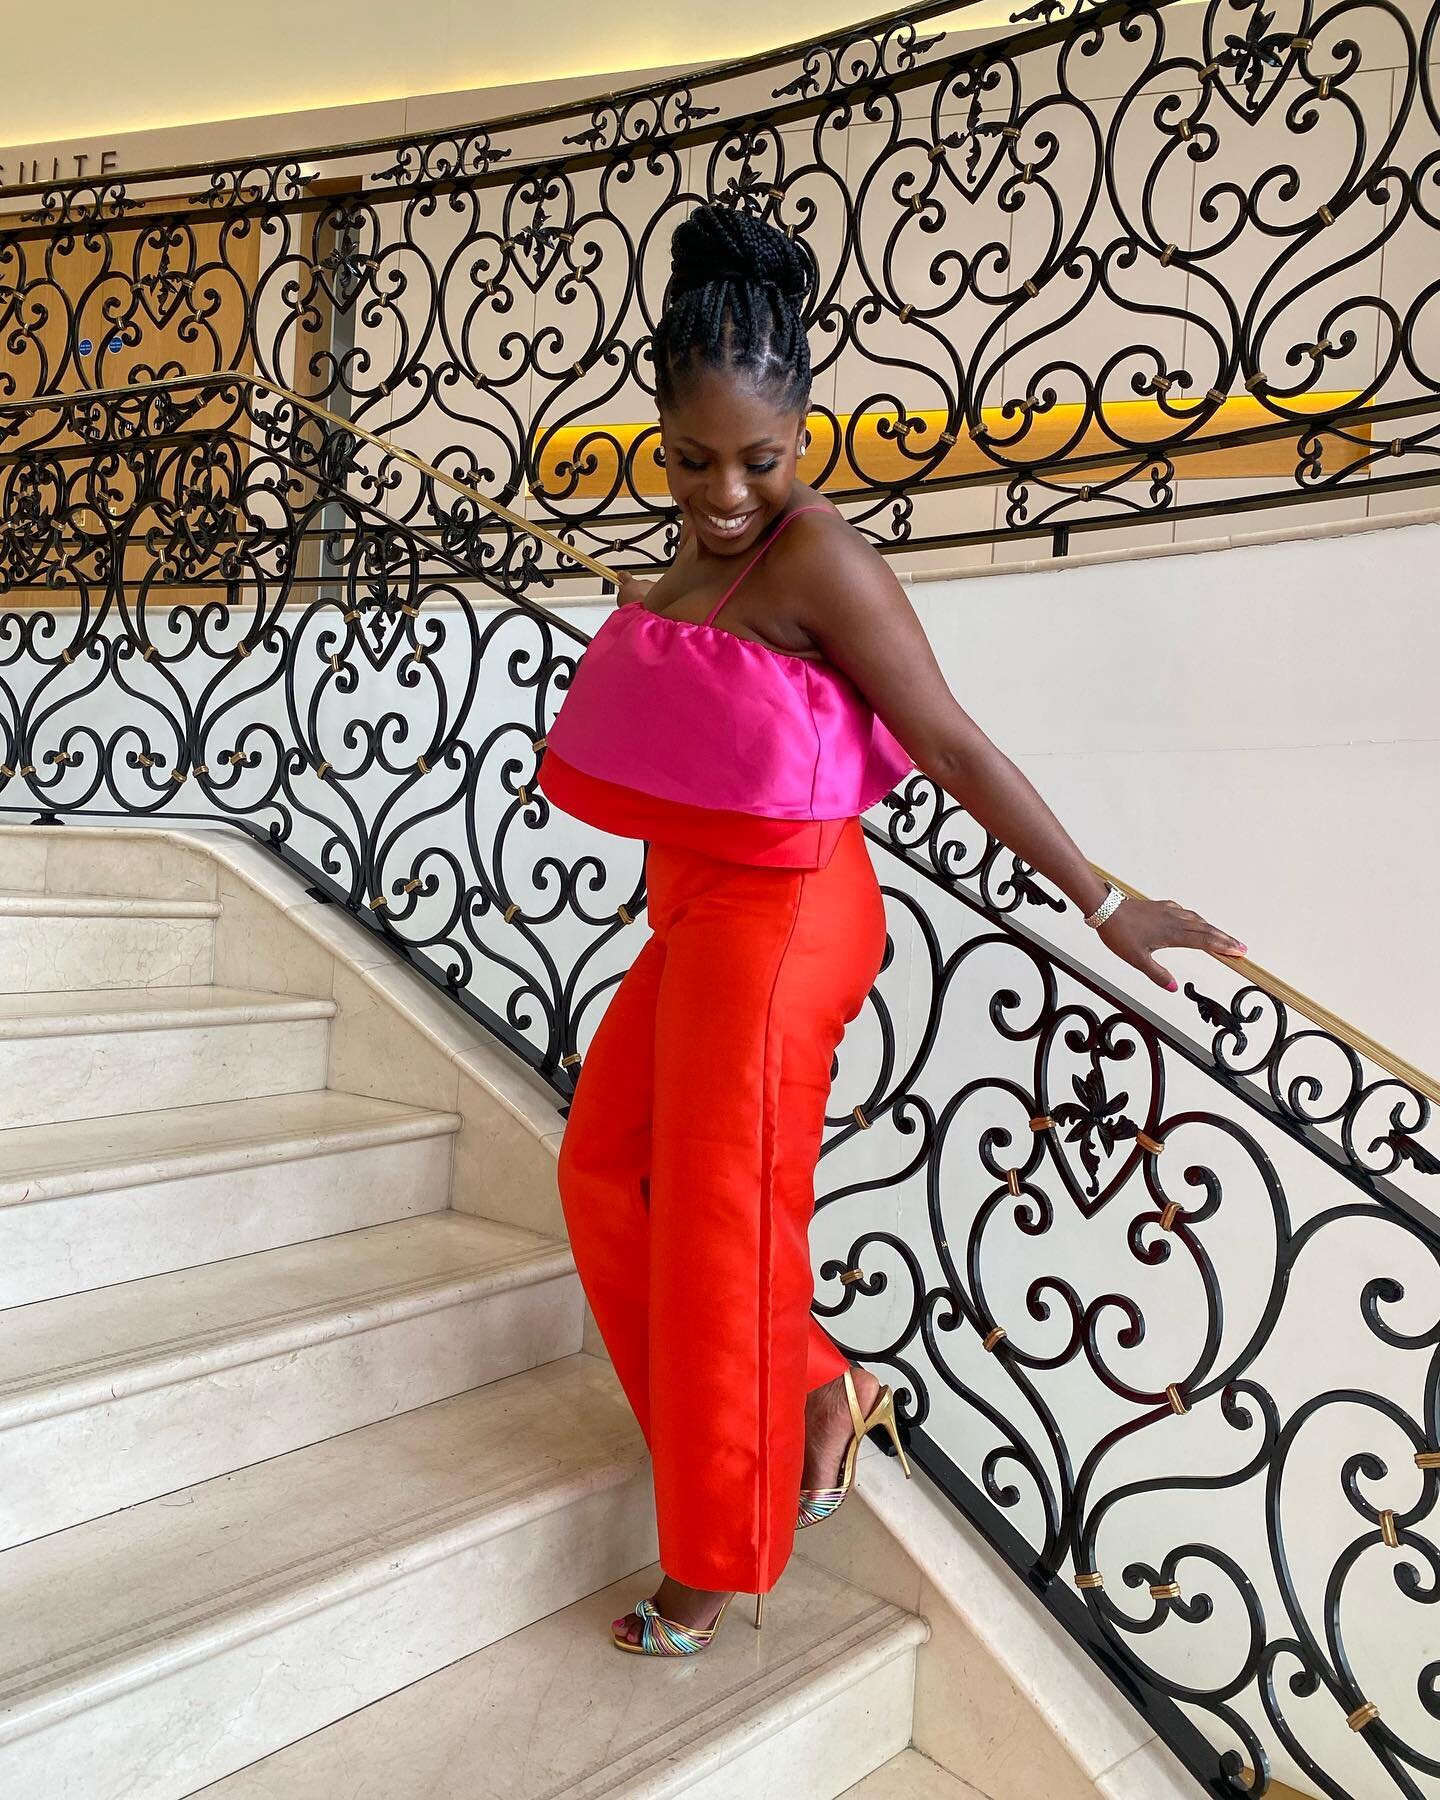 What Joy looks like 

Funfact: the outfit is not a Co-ord set. The top and trousers was bought separately from two different retail shops 😁

Hair @deborahlola 
Mua @breelliantmua 
Top @oasisfashion 
Trousers @warehouseuk 
Shoes @rivacalzature 

#fas